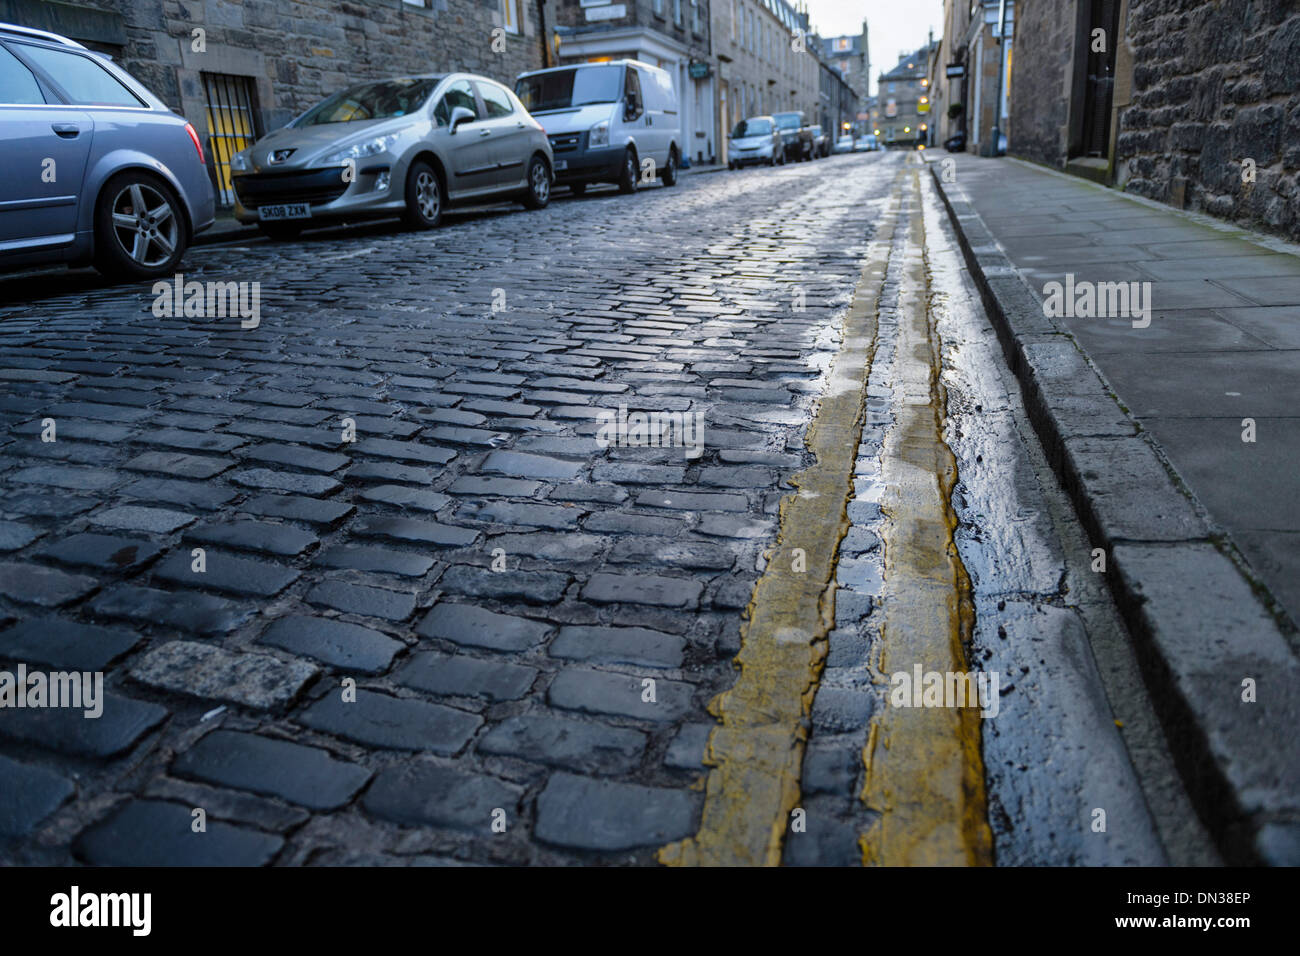 United Kingdom, cars on coblbled street in wet winter conditions Stock Photo